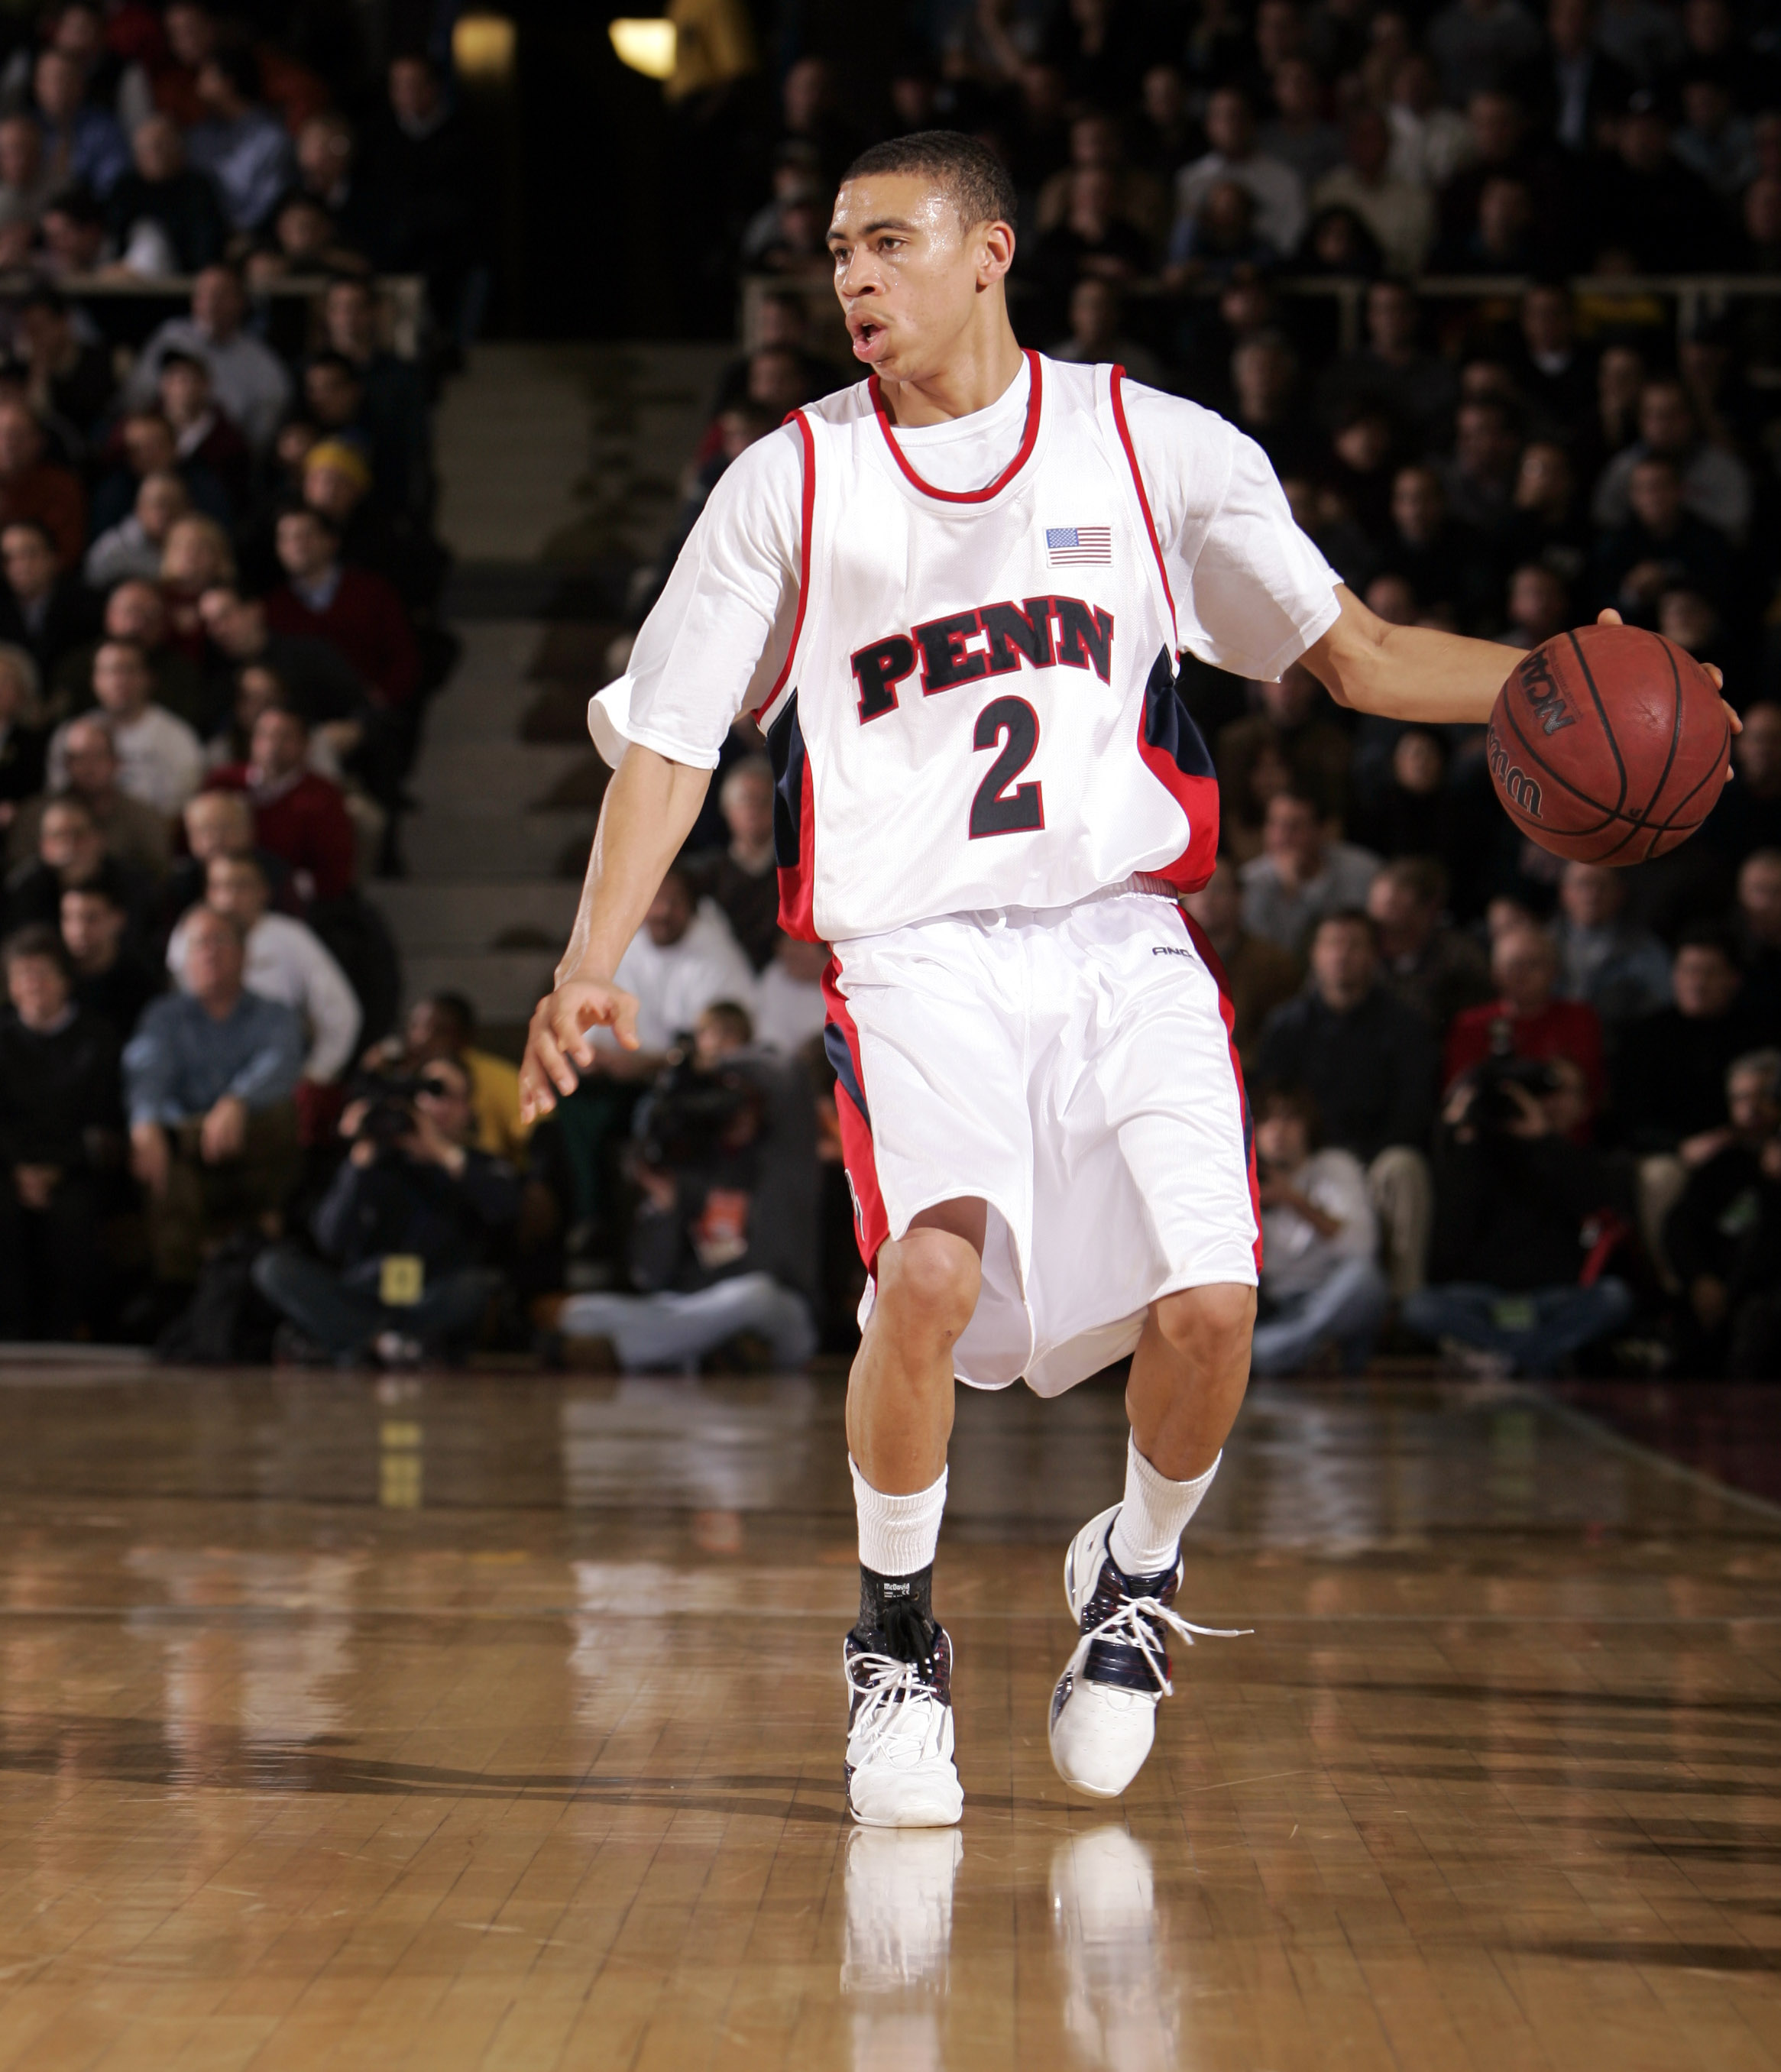 Ibrahim Jaaber dribbles the ball up the court at the Palestra, wearing his white number two Penn jersery.